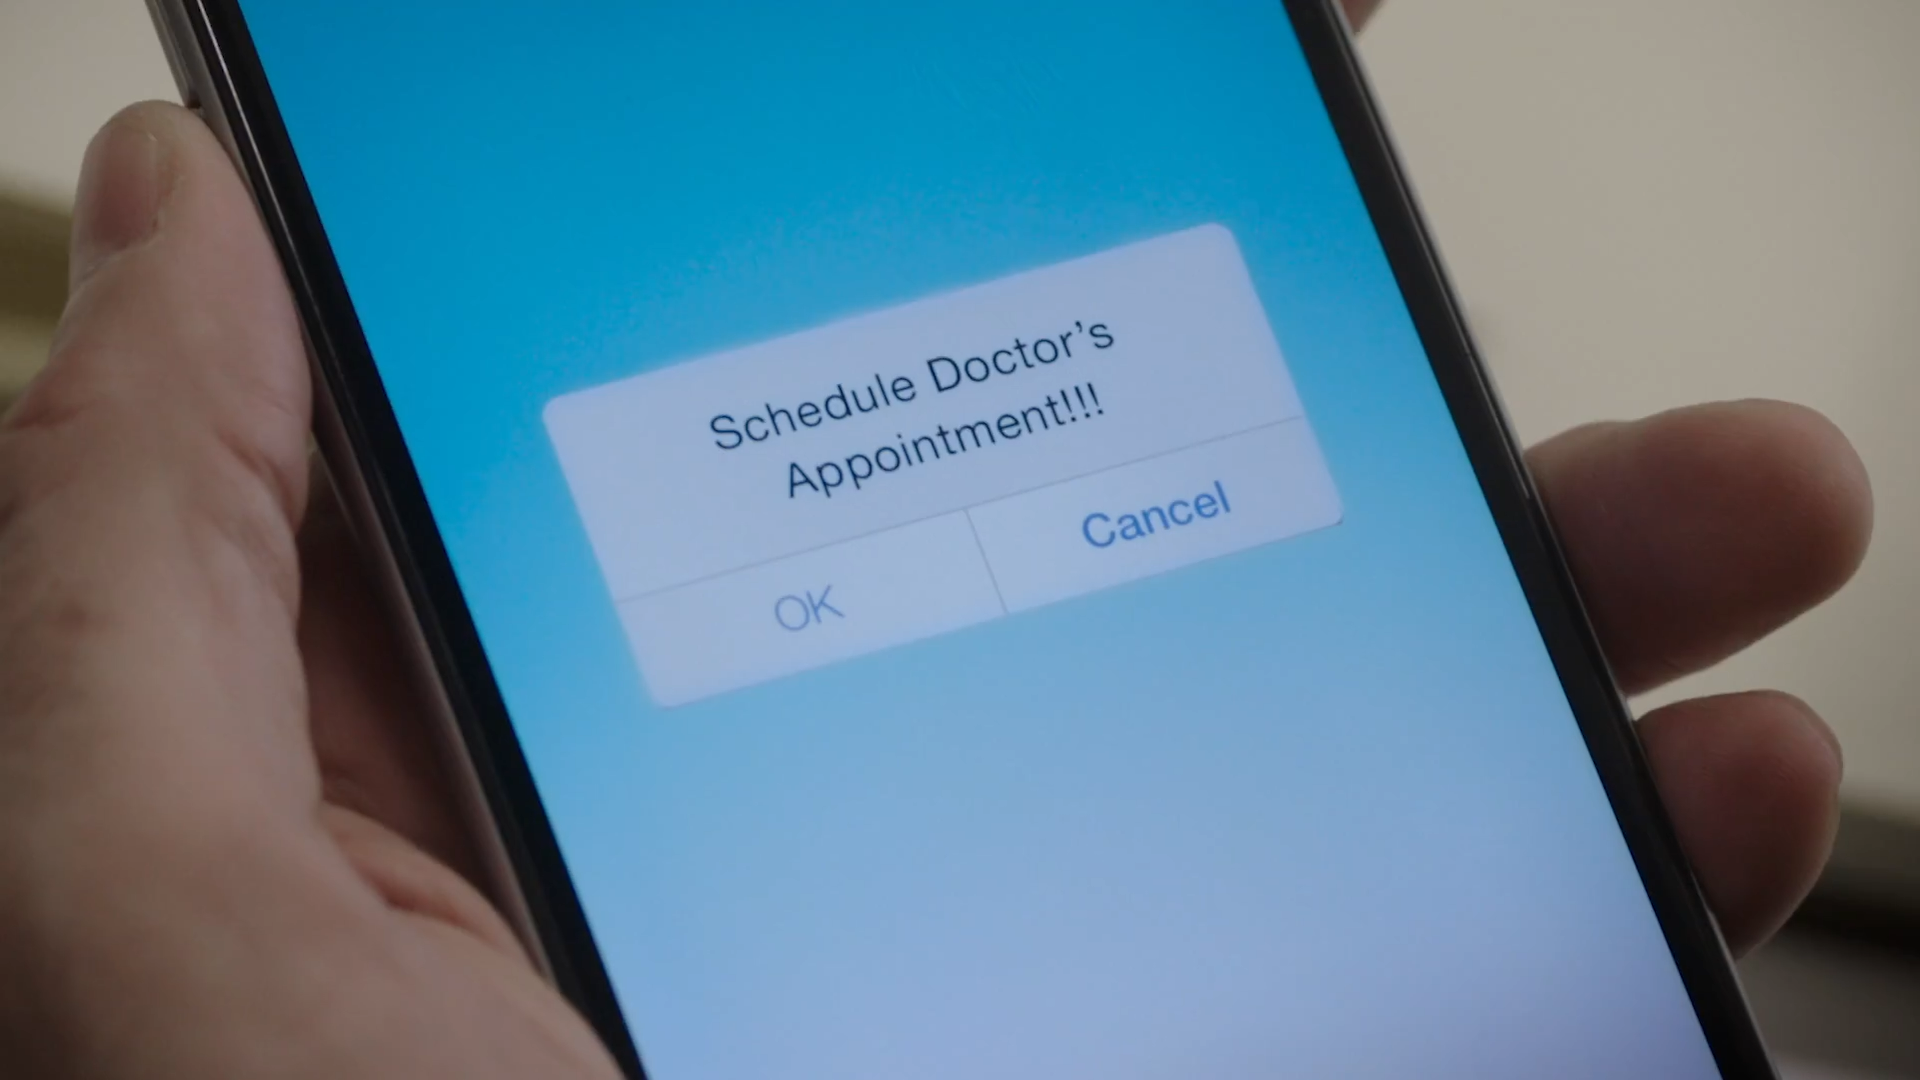 A closeup of a left hand holding a cell phone screen that displays a  "Schedule Doctor's Appointment!!!" notification.